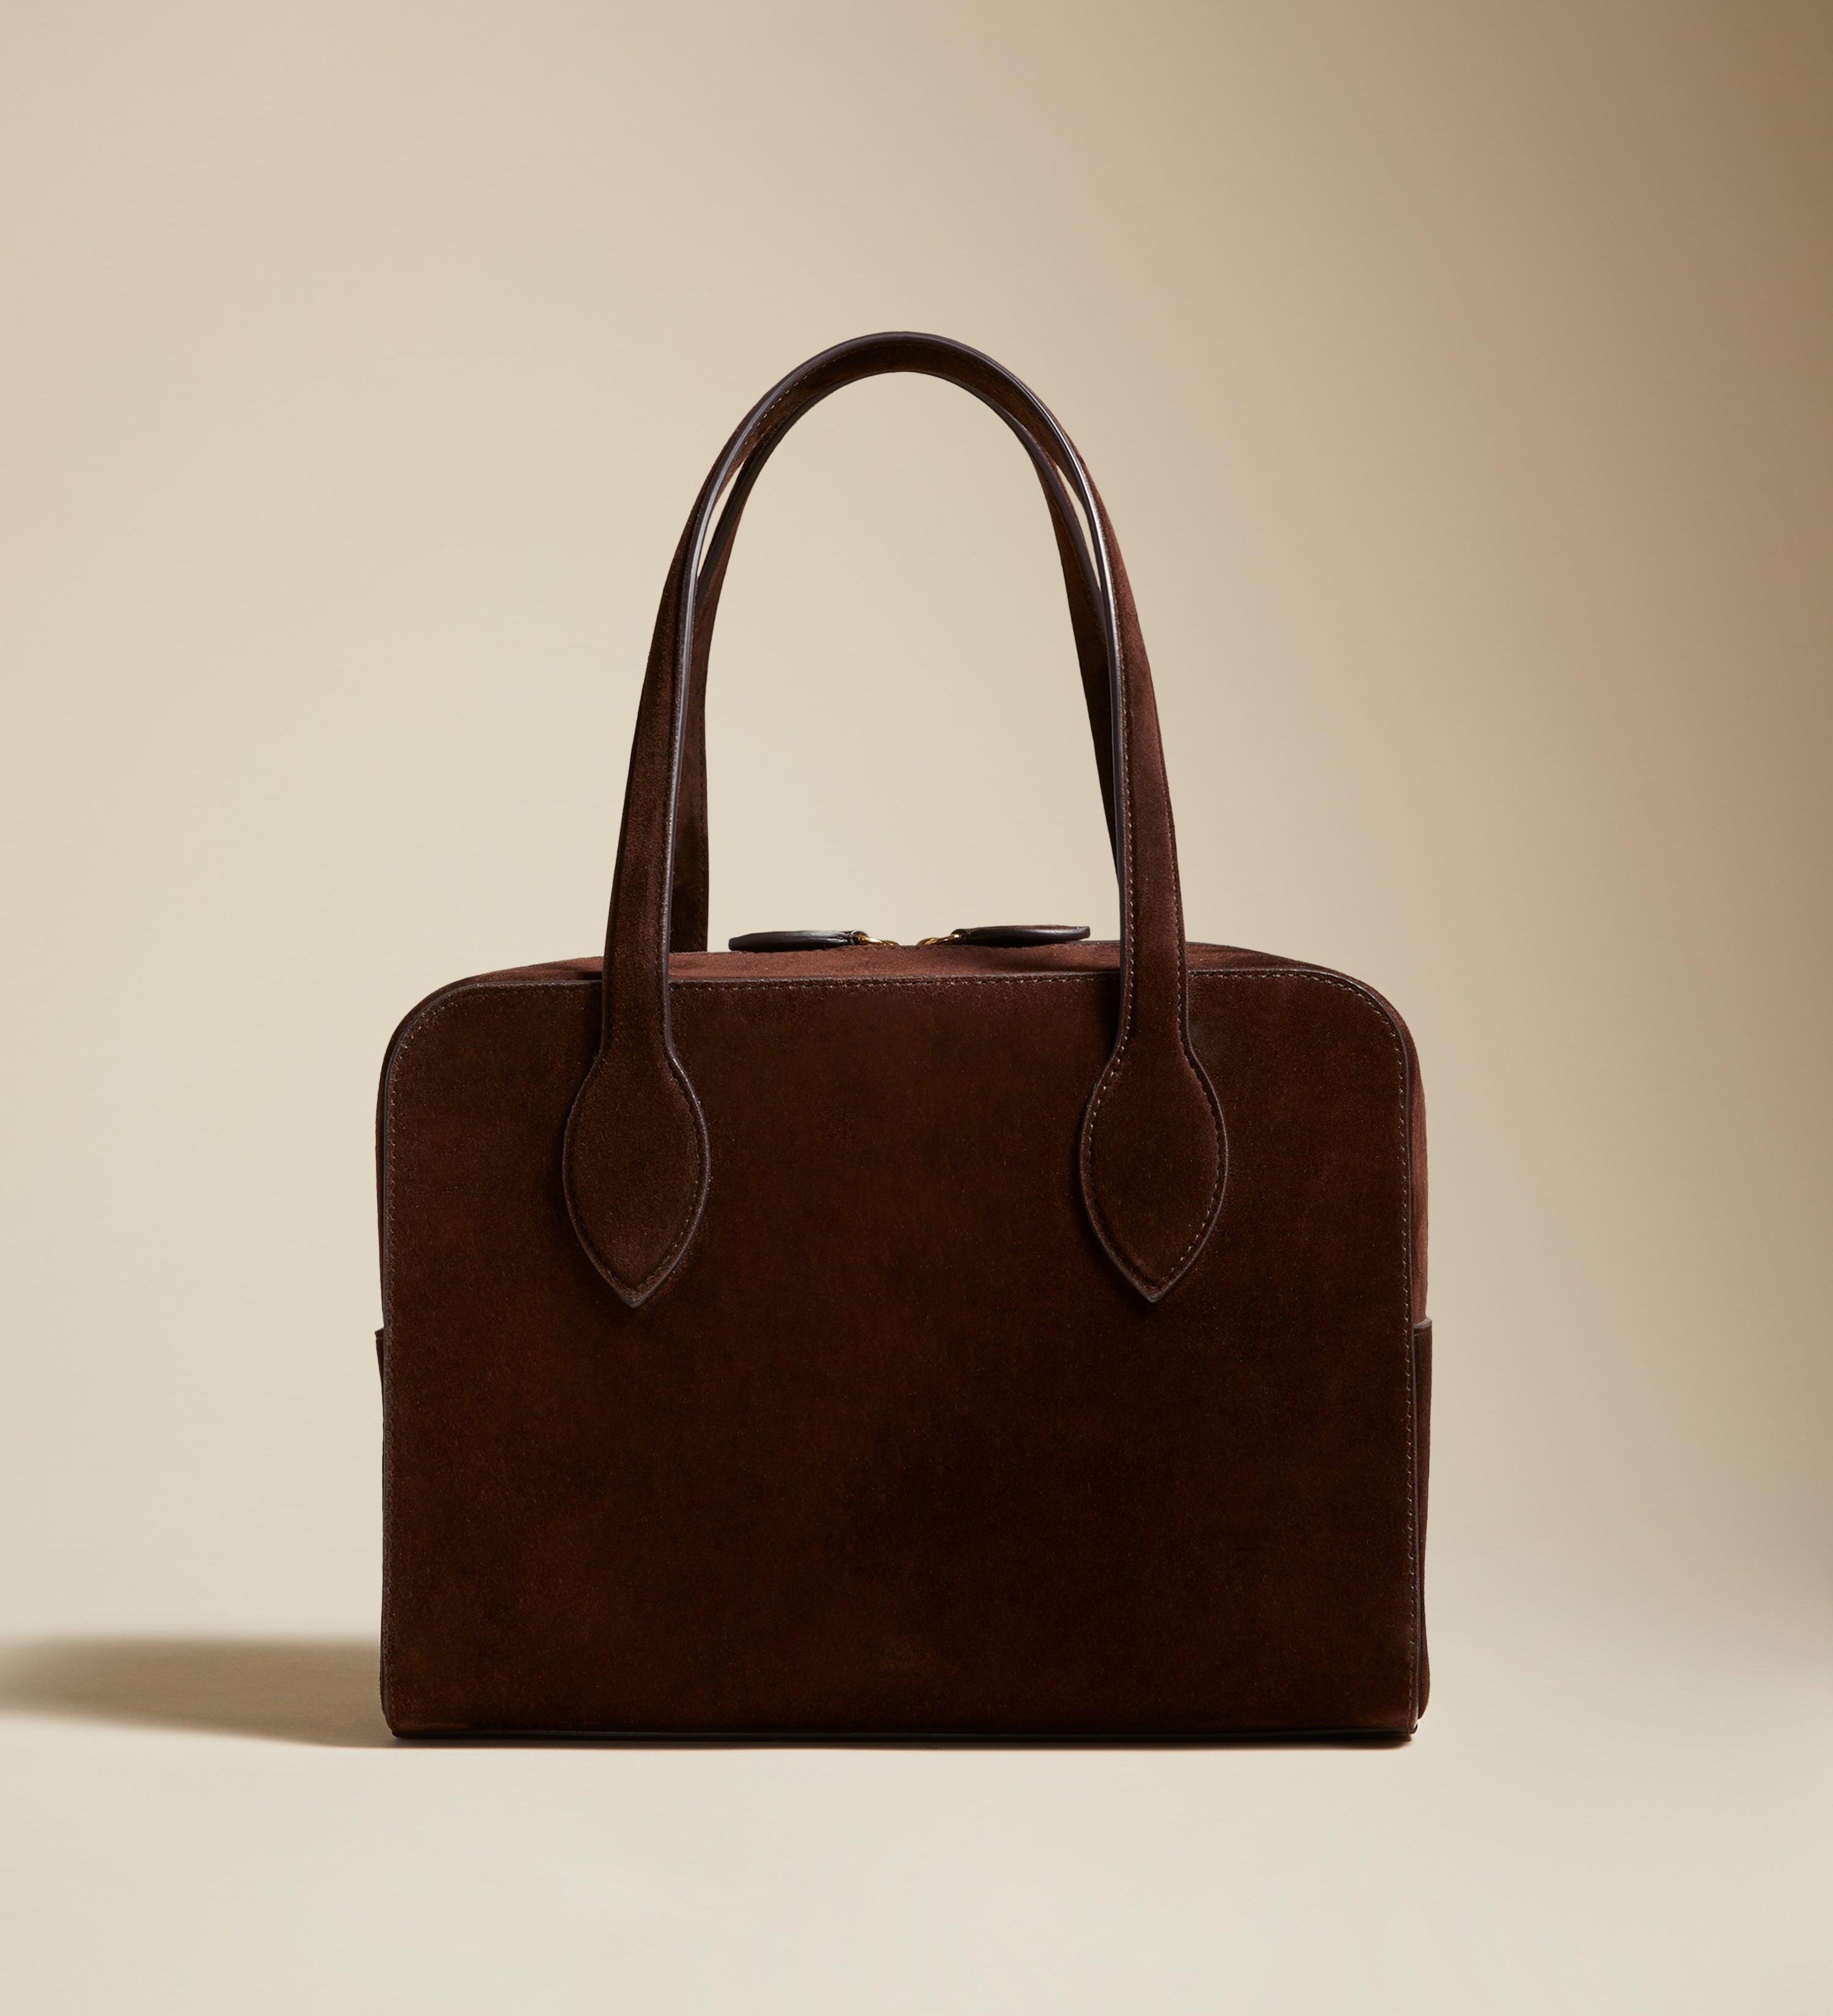 The Maeve Bag in Clay Suede - The Iconic Issue